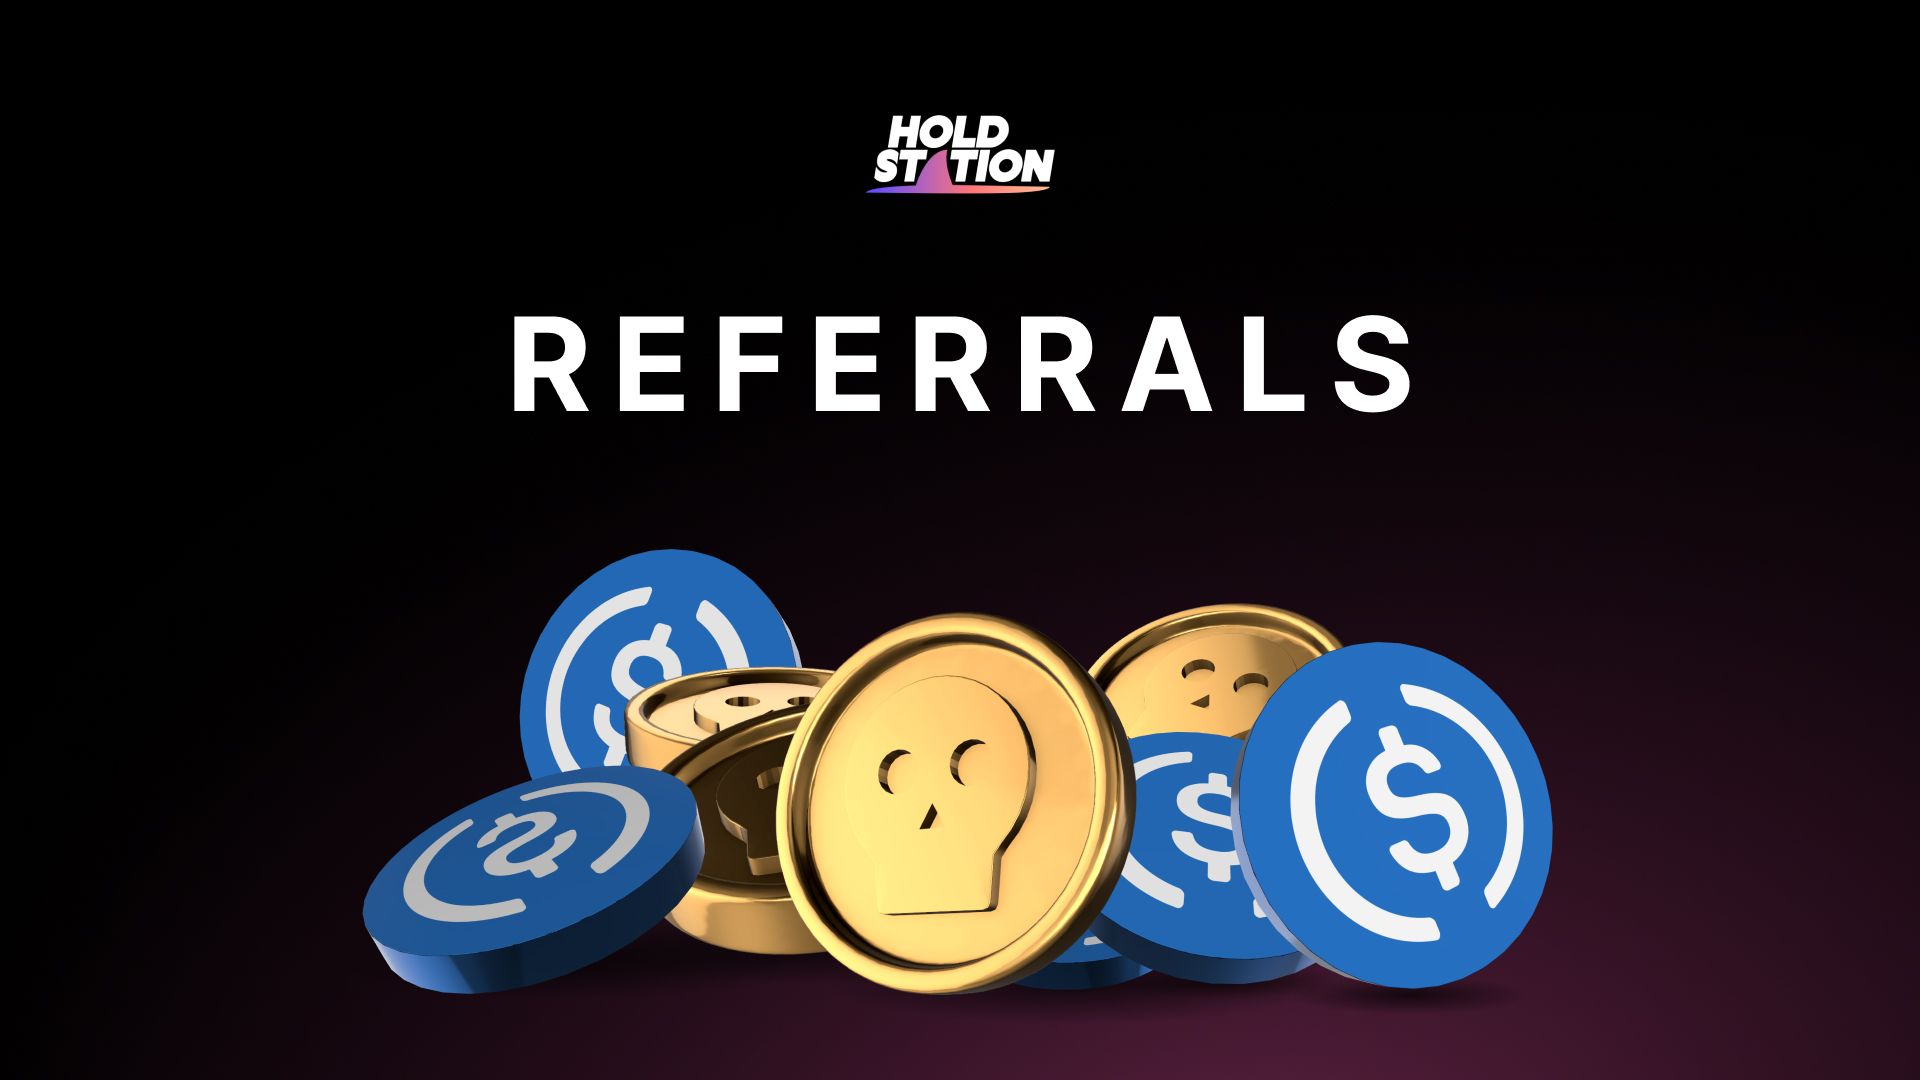 What Is The Holdstation Wallet Referral Program? Difference And Value